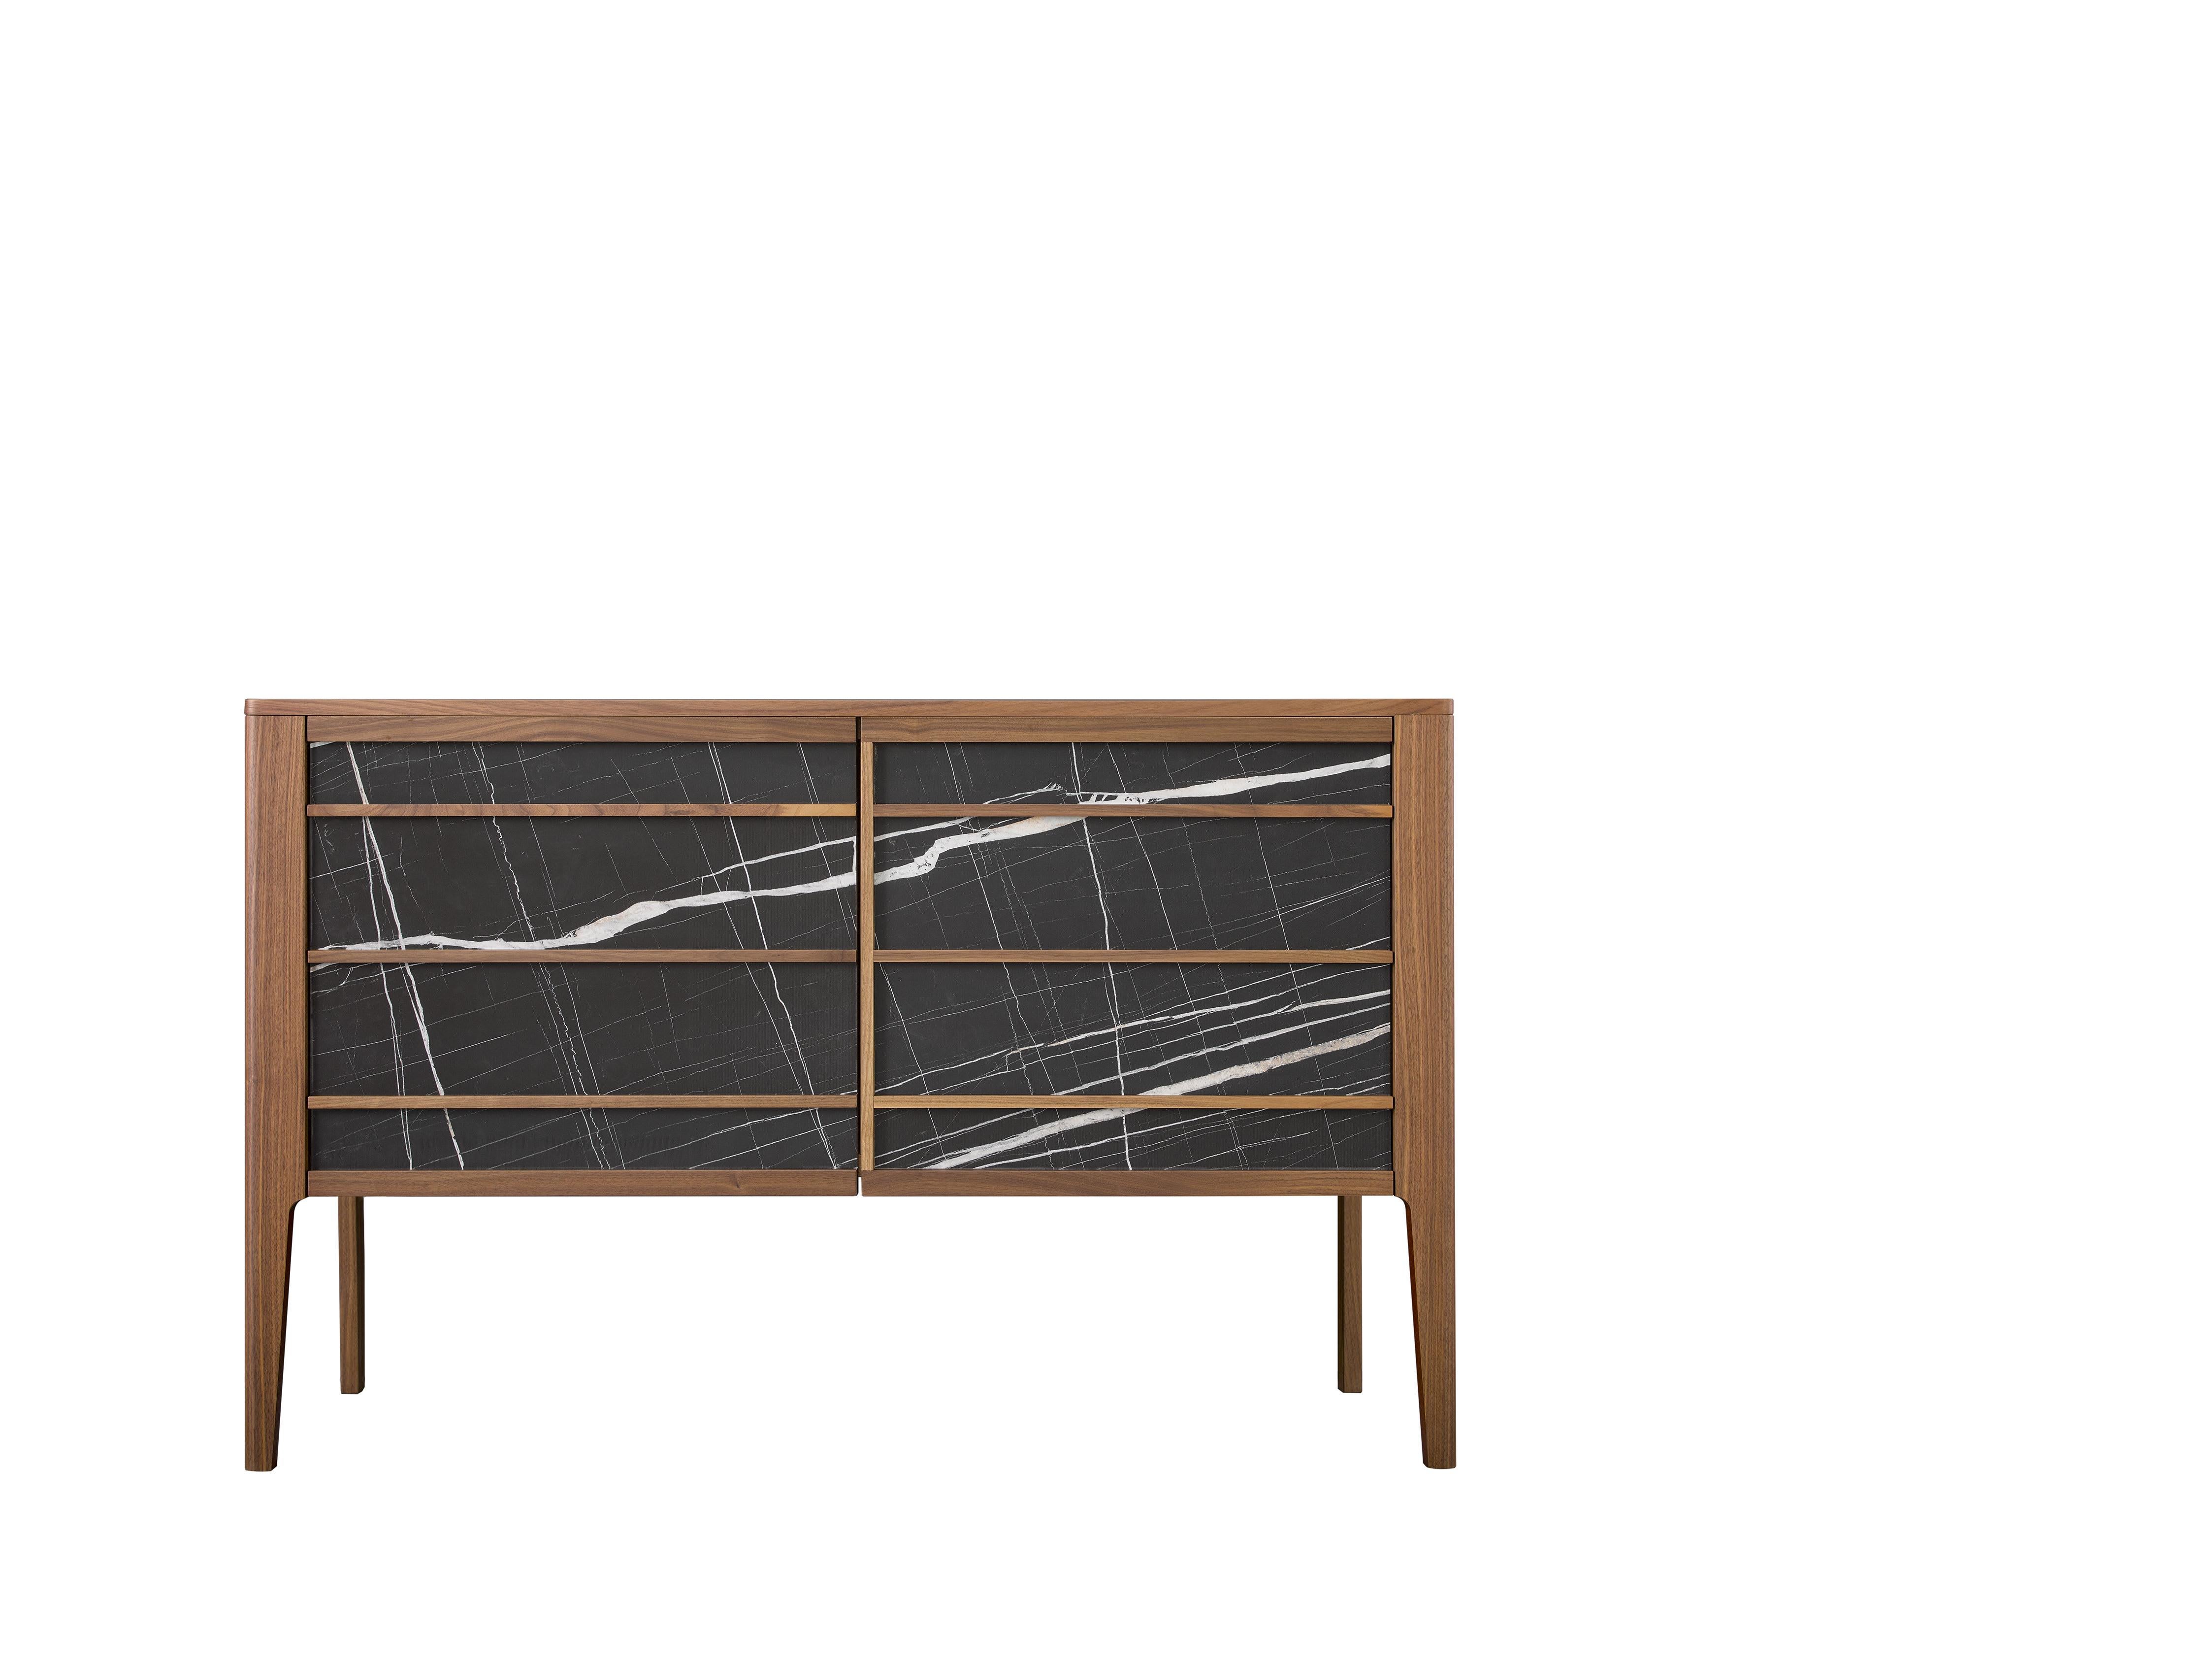 This elegant sideboard features 2 wooden doors with a Sahara Noir Marble front that complements the Havana finish structure. The integrated wooden handles hide 2 glass shelves.